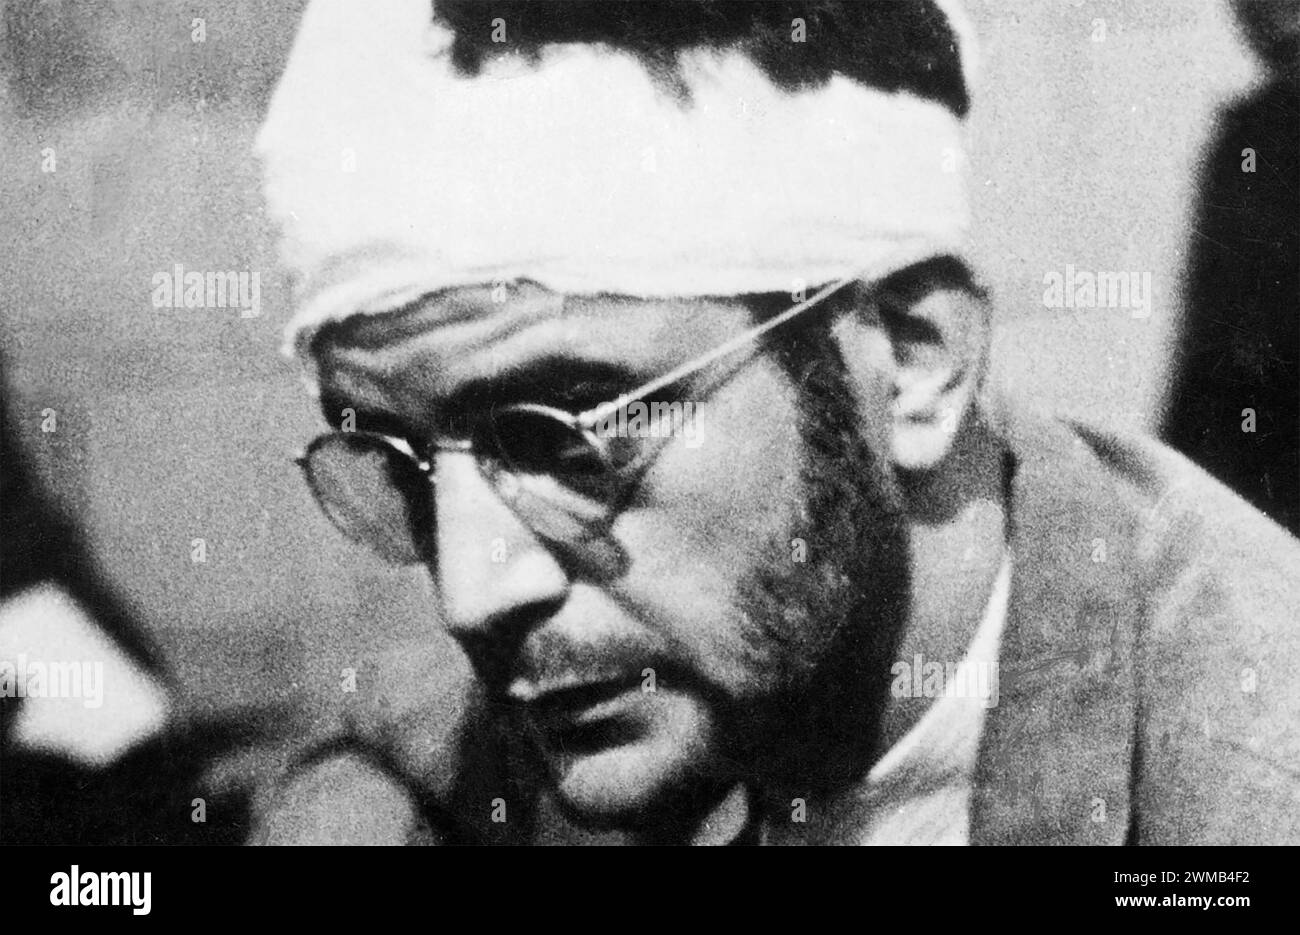 RAMON MERCADER (1913-1978) Spanish Communist and NKVD agent after his arrest for the assassination of Leon Trotsky in Mexico City on 20 August 1940. His head injuries were inflicted by Trotsky's guards after the assault. Stock Photo